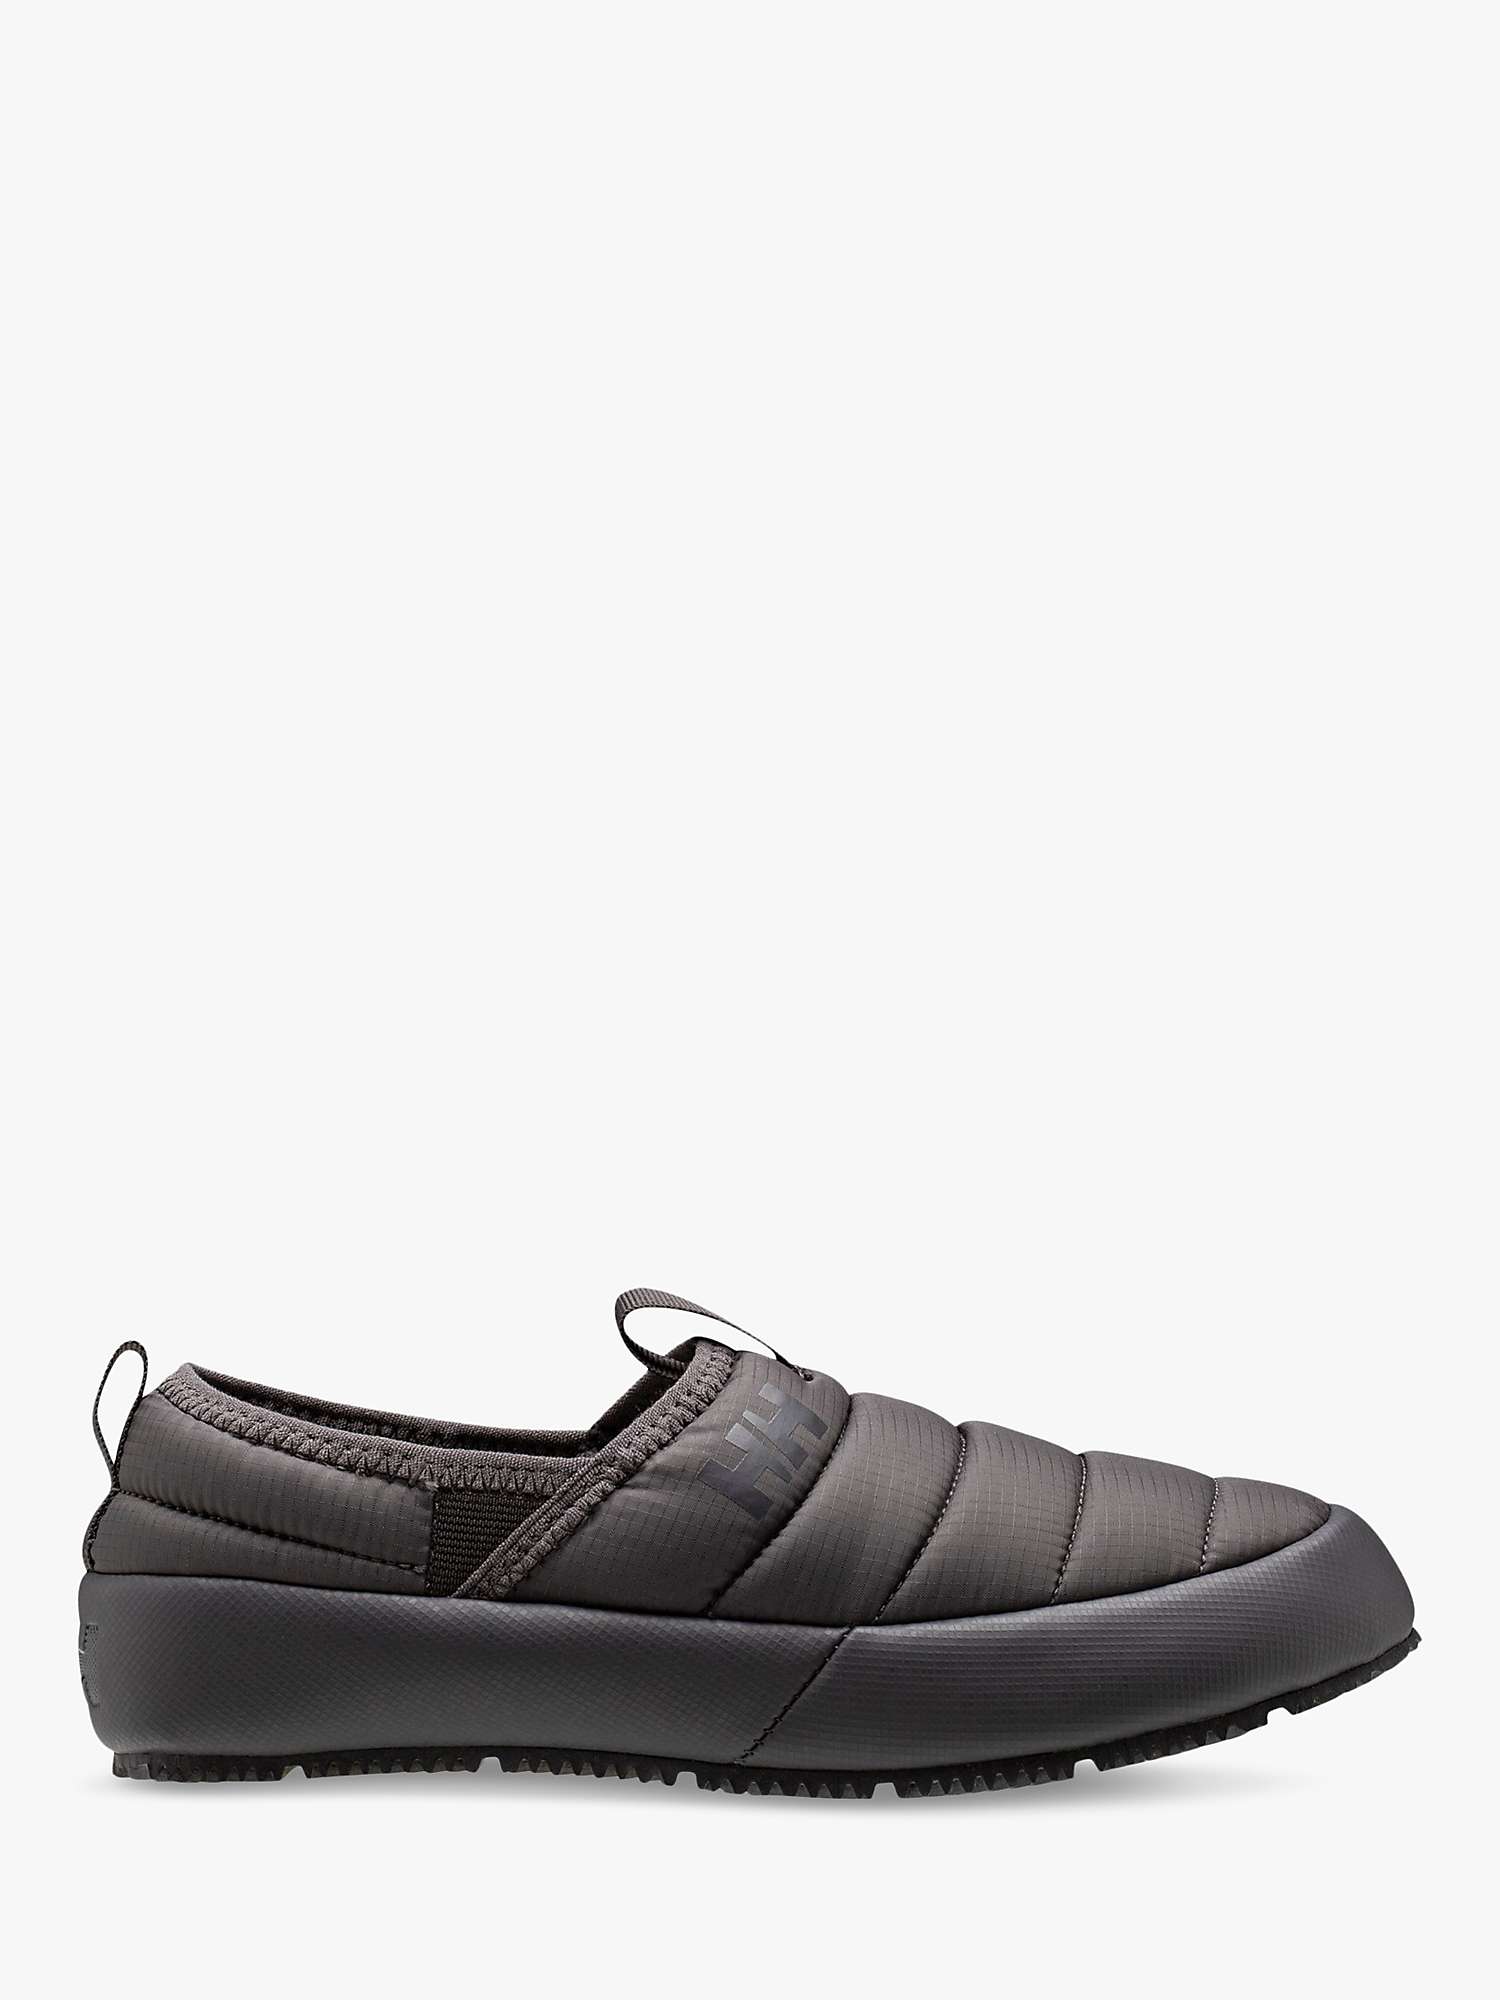 Buy Helly Hansen Cabin Loafers Online at johnlewis.com